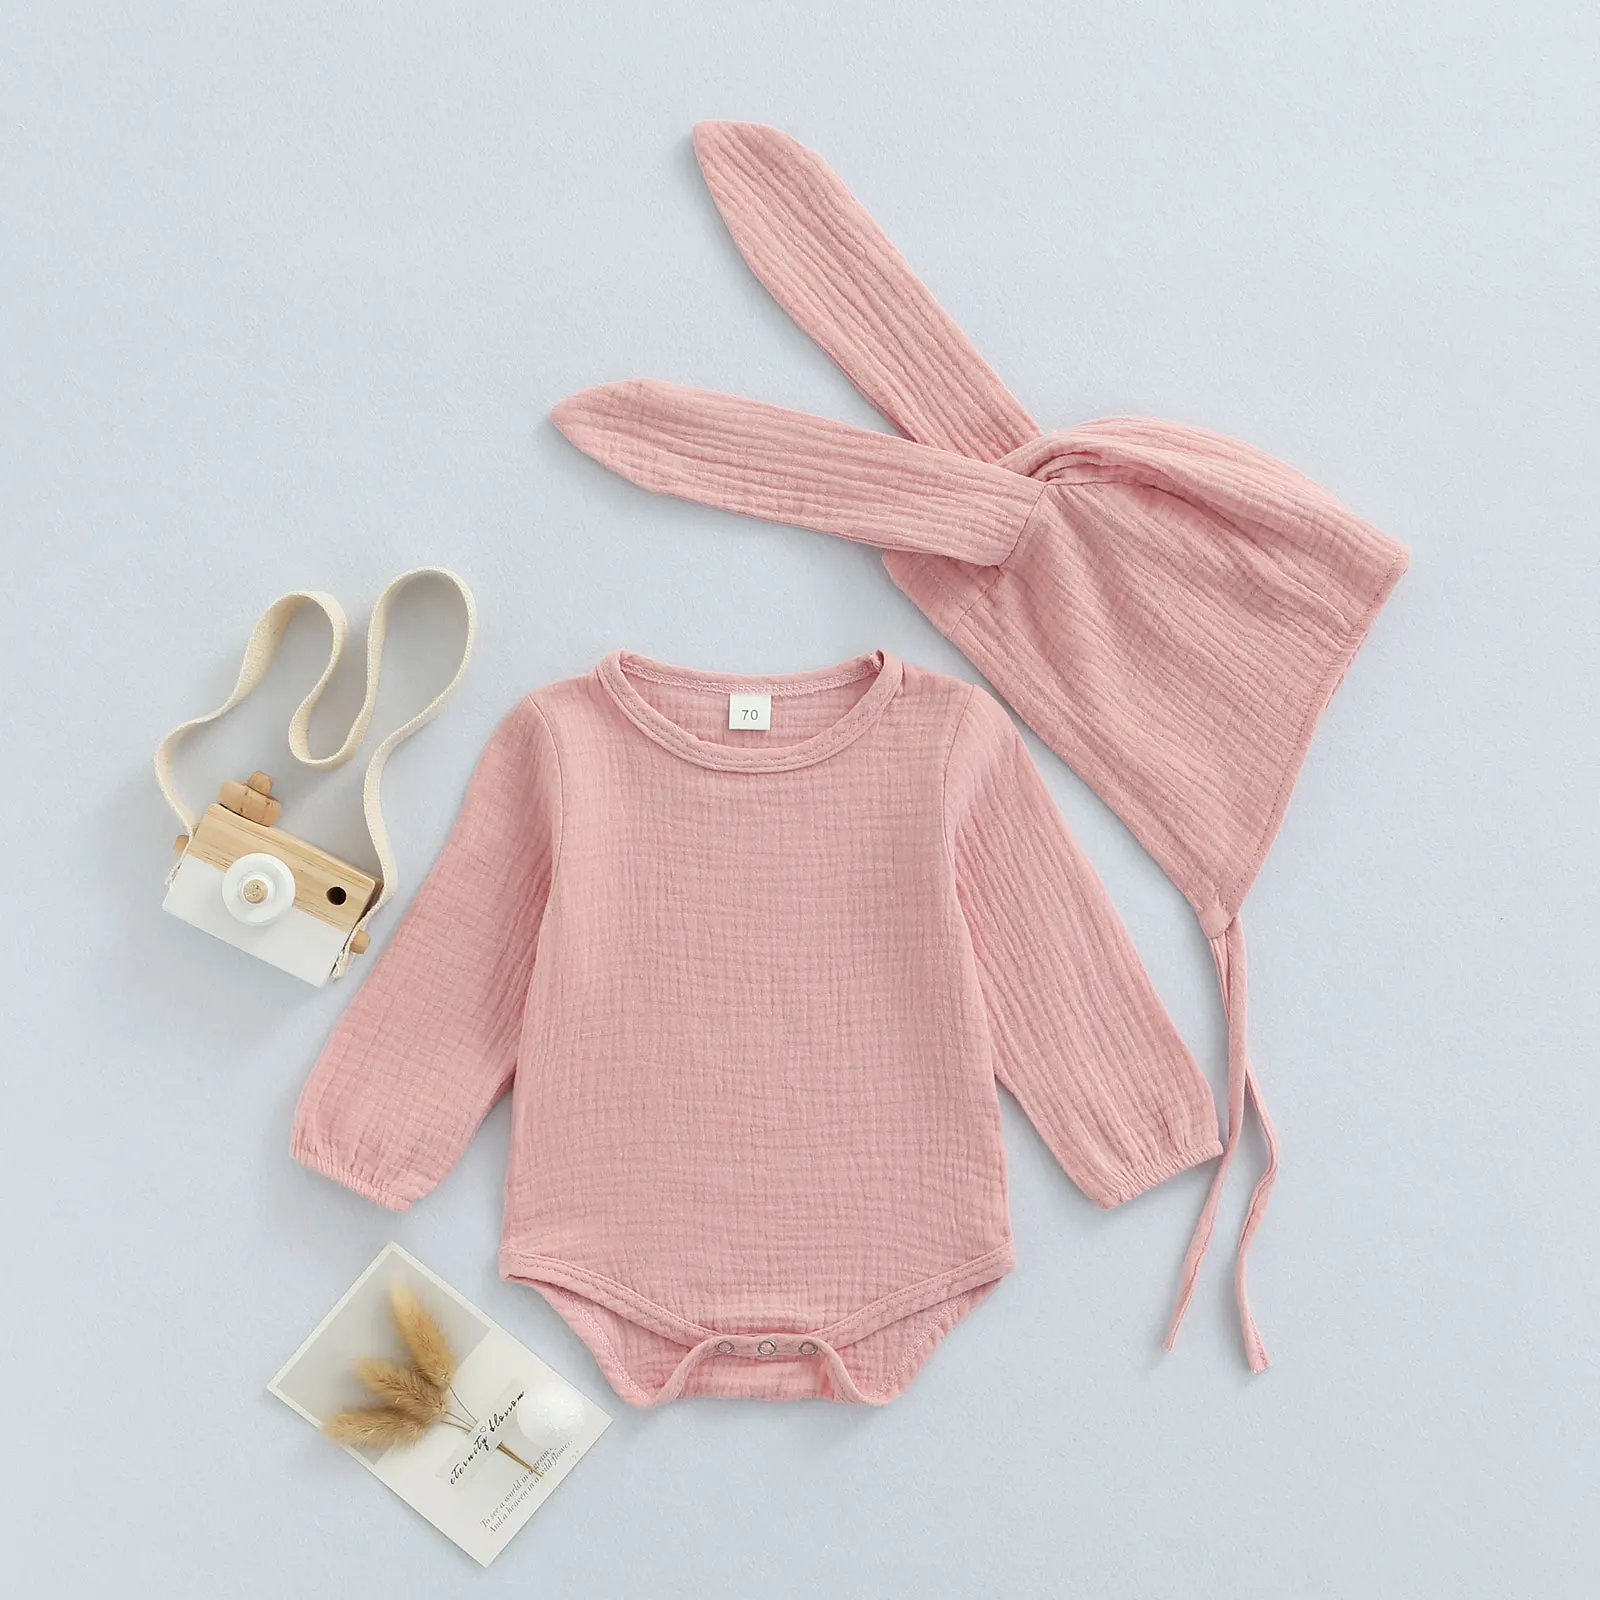 Ma&Baby 3-24M Newborn Infant Baby Boys Girls Bunny Romper Long Sleeve Jumpsuit + Long Ear Hat Autumn Spring Easter Clothes D84 Baby Bodysuits made from viscose 